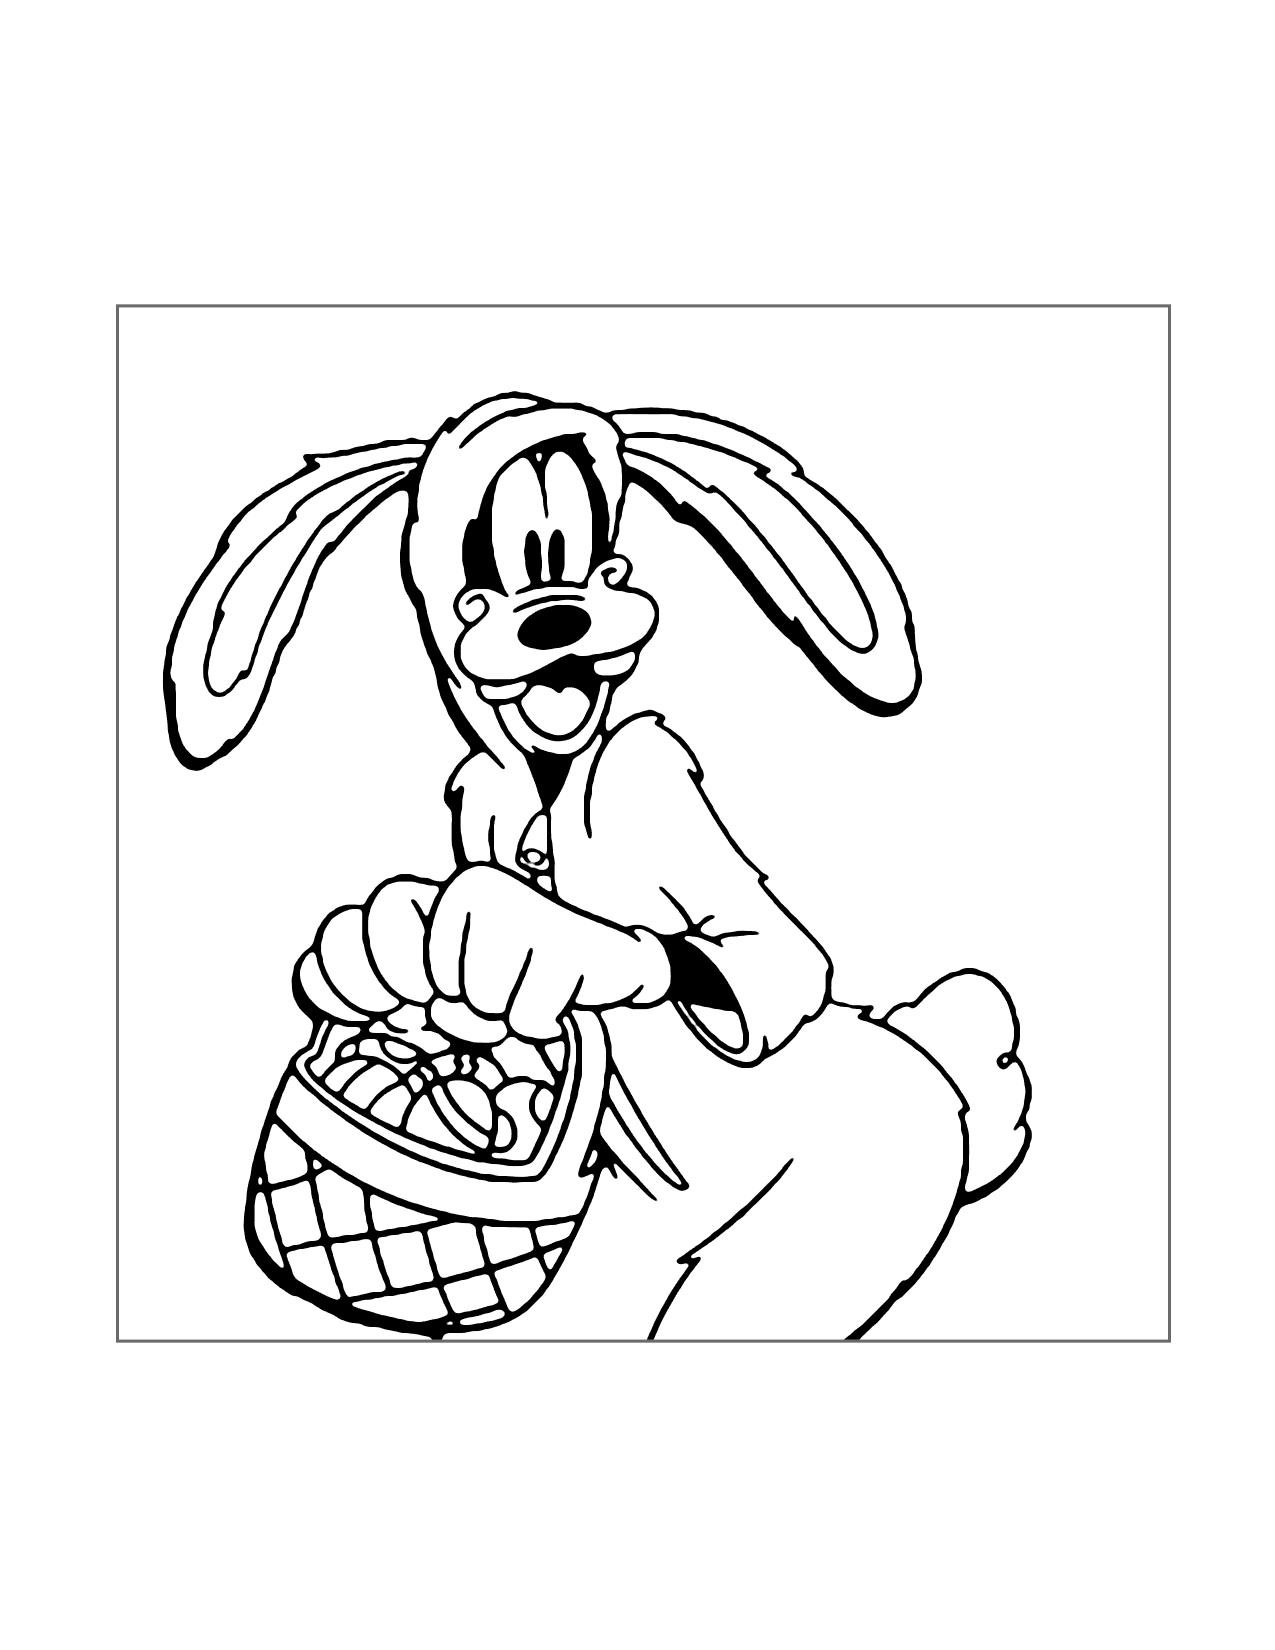 The Goofy Bunny Coloring Page